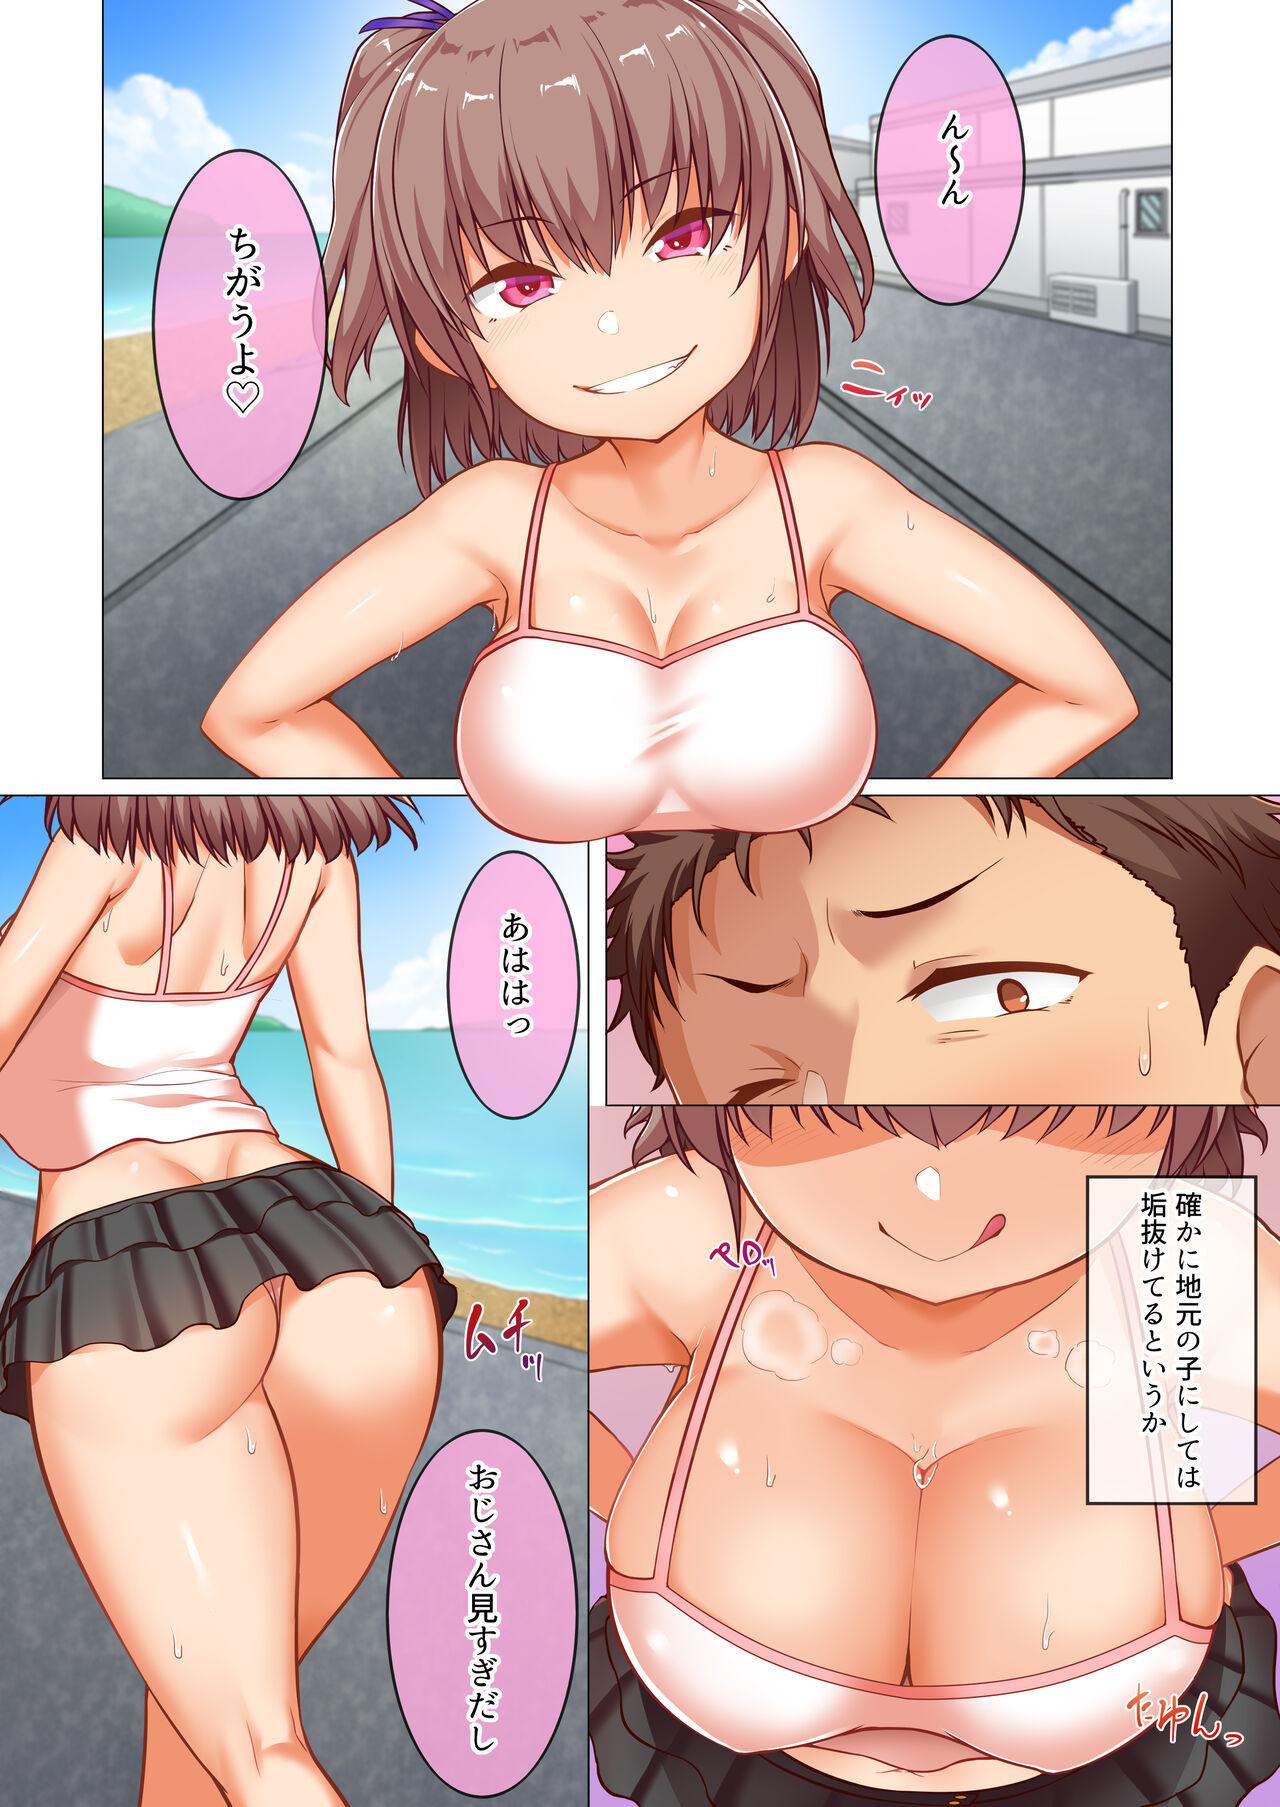 Mujer 巨乳メスガキたちと真夏の島で種付けし放題な汁だくドスケベリモート性活♪ Ass To Mouth - Page 6